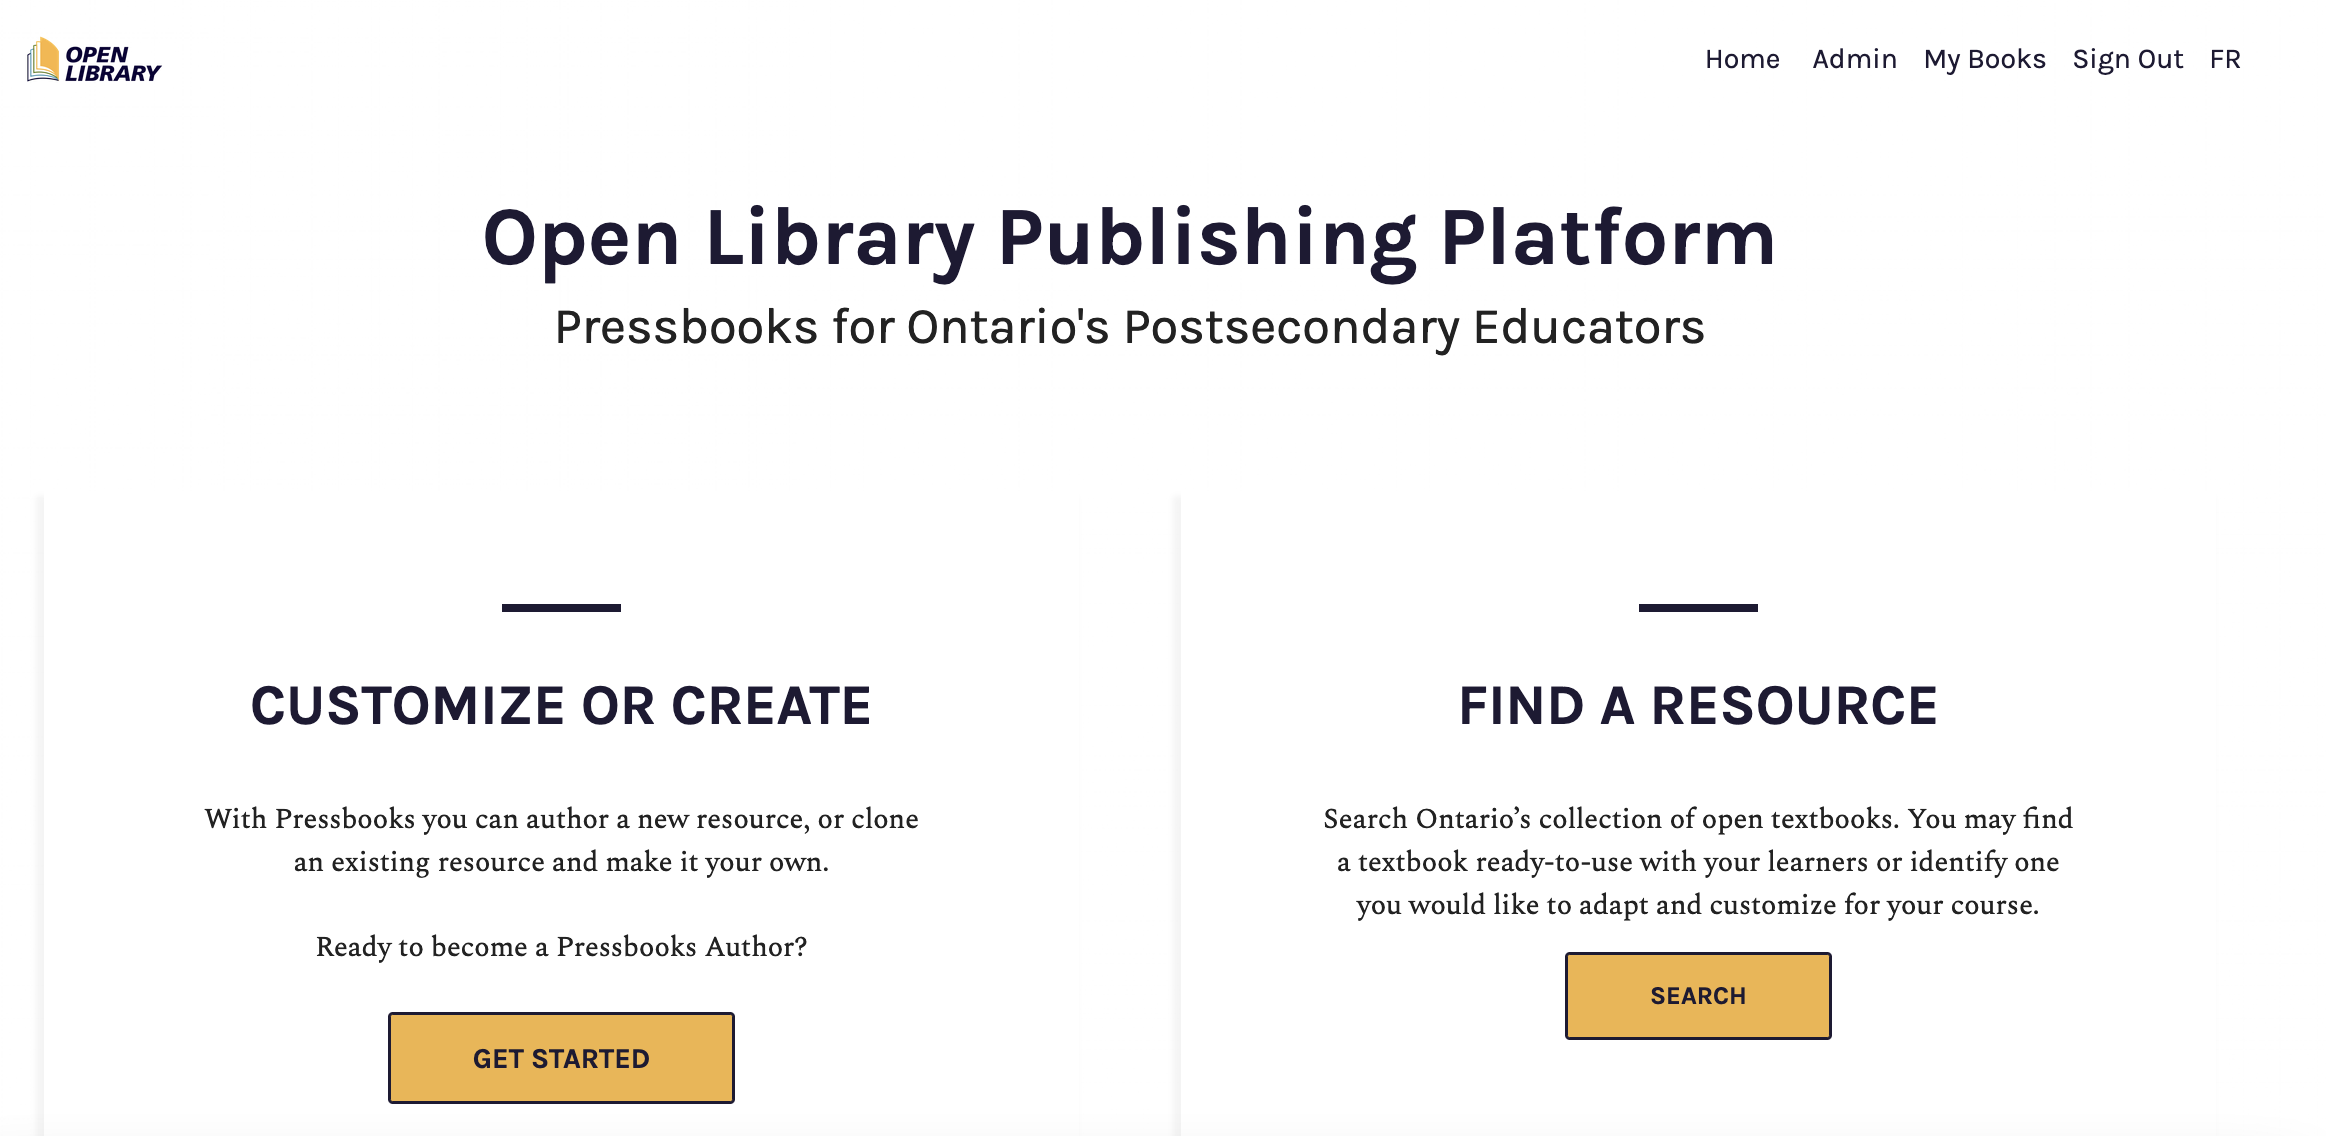 Landing page of eCampusOntario’s Pressbooks platform after logging in with “My Books” in top right corner